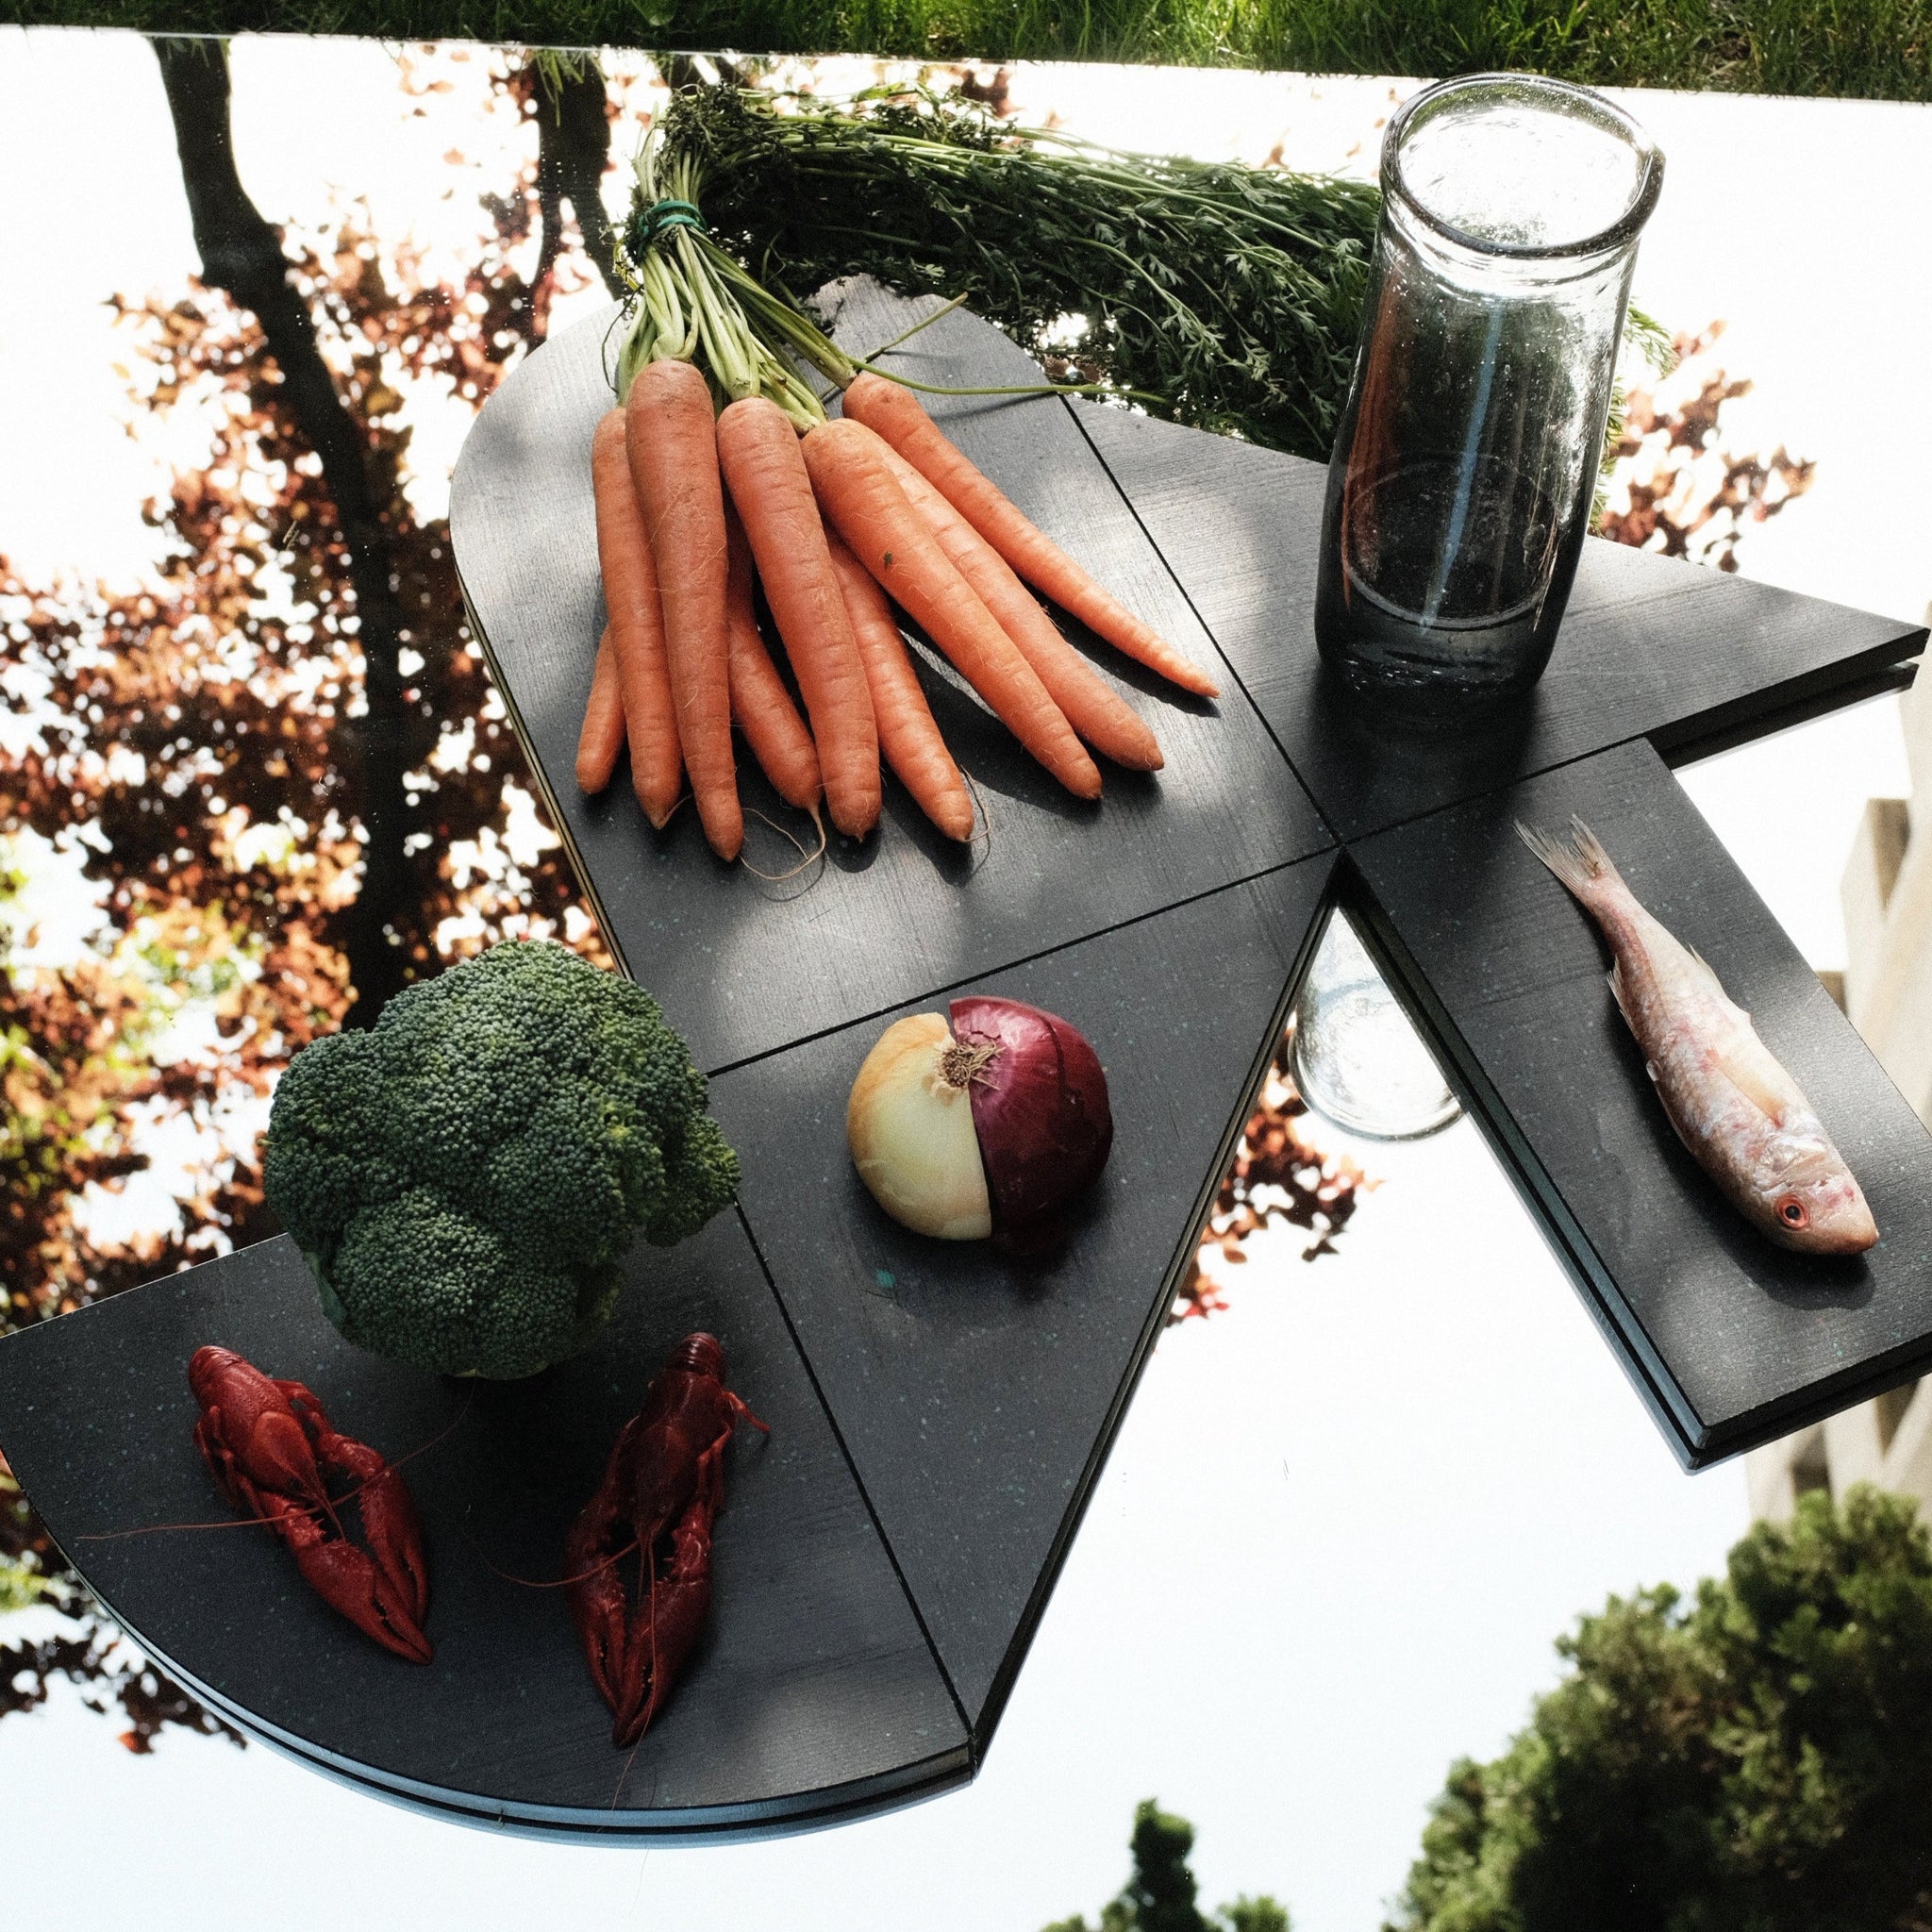 SET OF BLACK CHARCUTERIE CUTTING BOARDS ON MIRROR BY THE MINIMONO PROJECT - BRAND FOR ECO FRIENDLY - PLAYFUL - MULTI FUNCTIONAL - SUSTAINABLE - HIGH QUALITY - DESIGN FURNITURE FROM RECYCLED PLASTIC FOR BOTH ADULT AND CHILDREN MADE IN BERLIN GERMANY